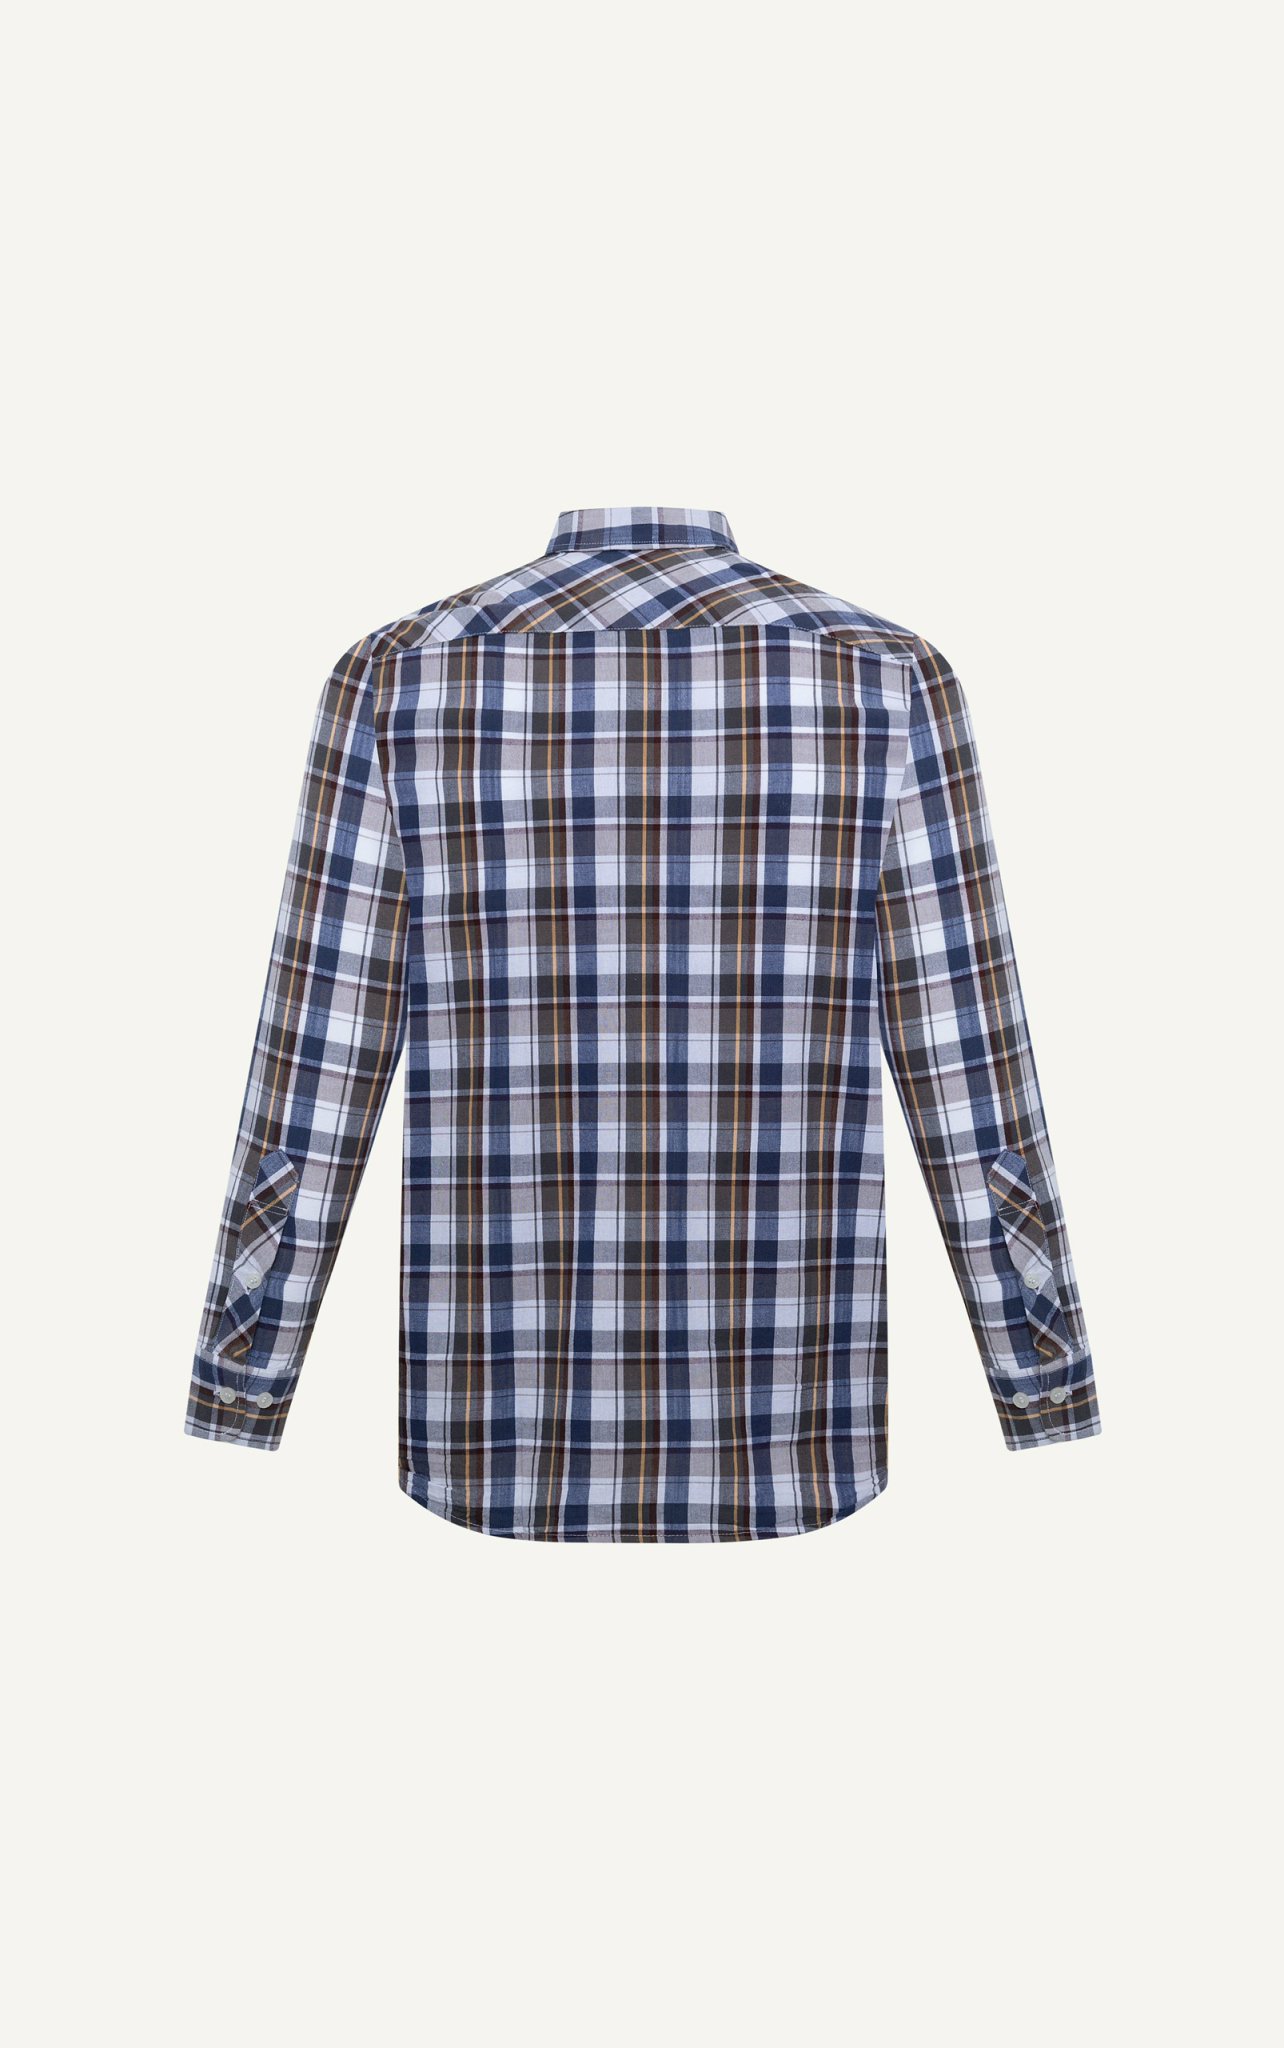 AG311 FACTORY REGULAR FIT MIX COLOR CHECKED SHIRT - YELLOW